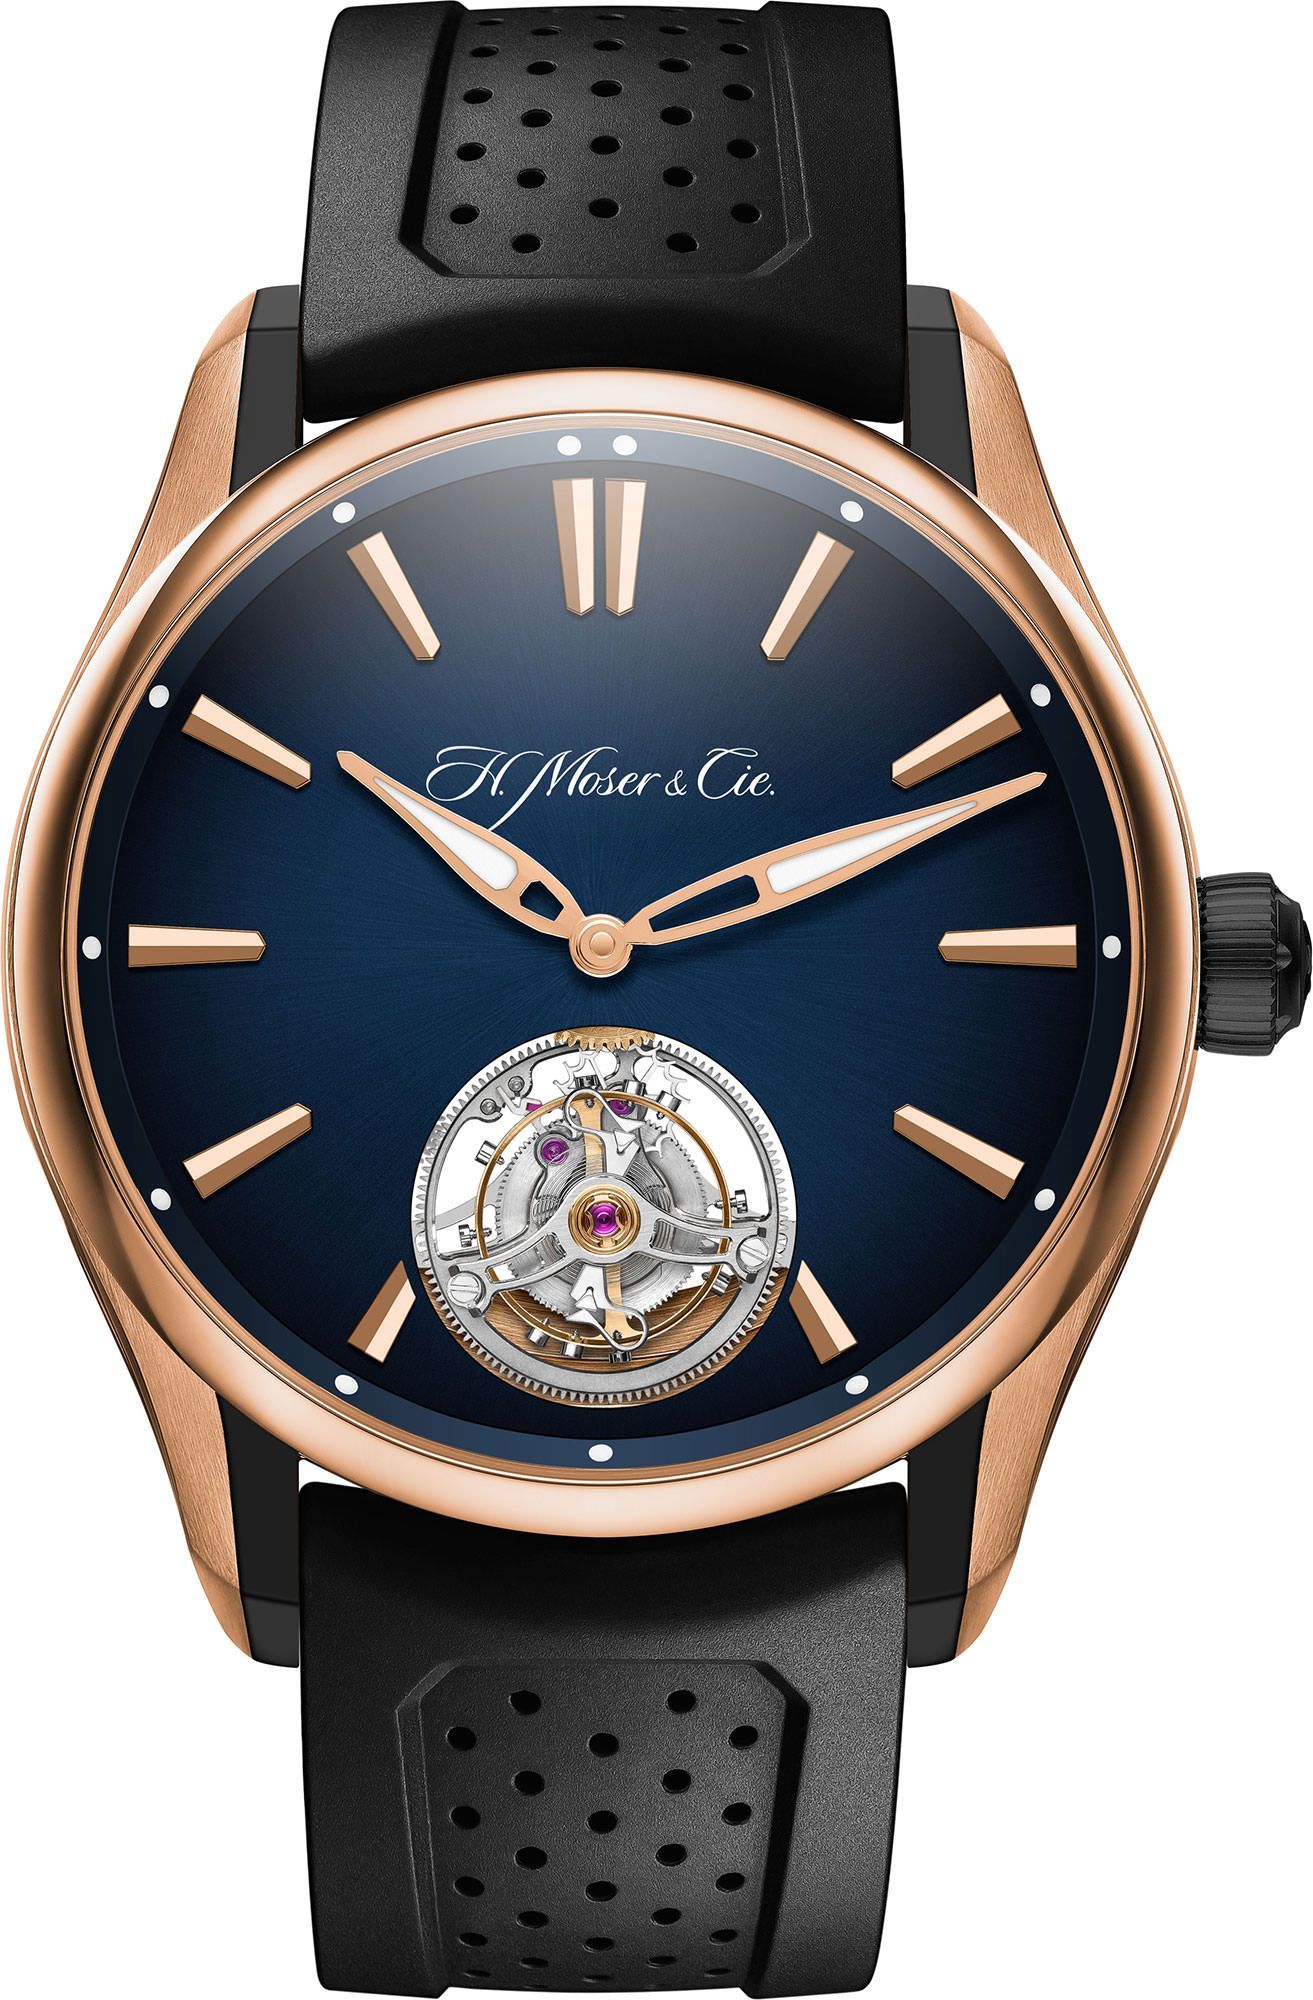 H. Moser & Cie. Pioneer Tourbillon Blue Dial 42.8 mm Automatic Watch For Men - 1